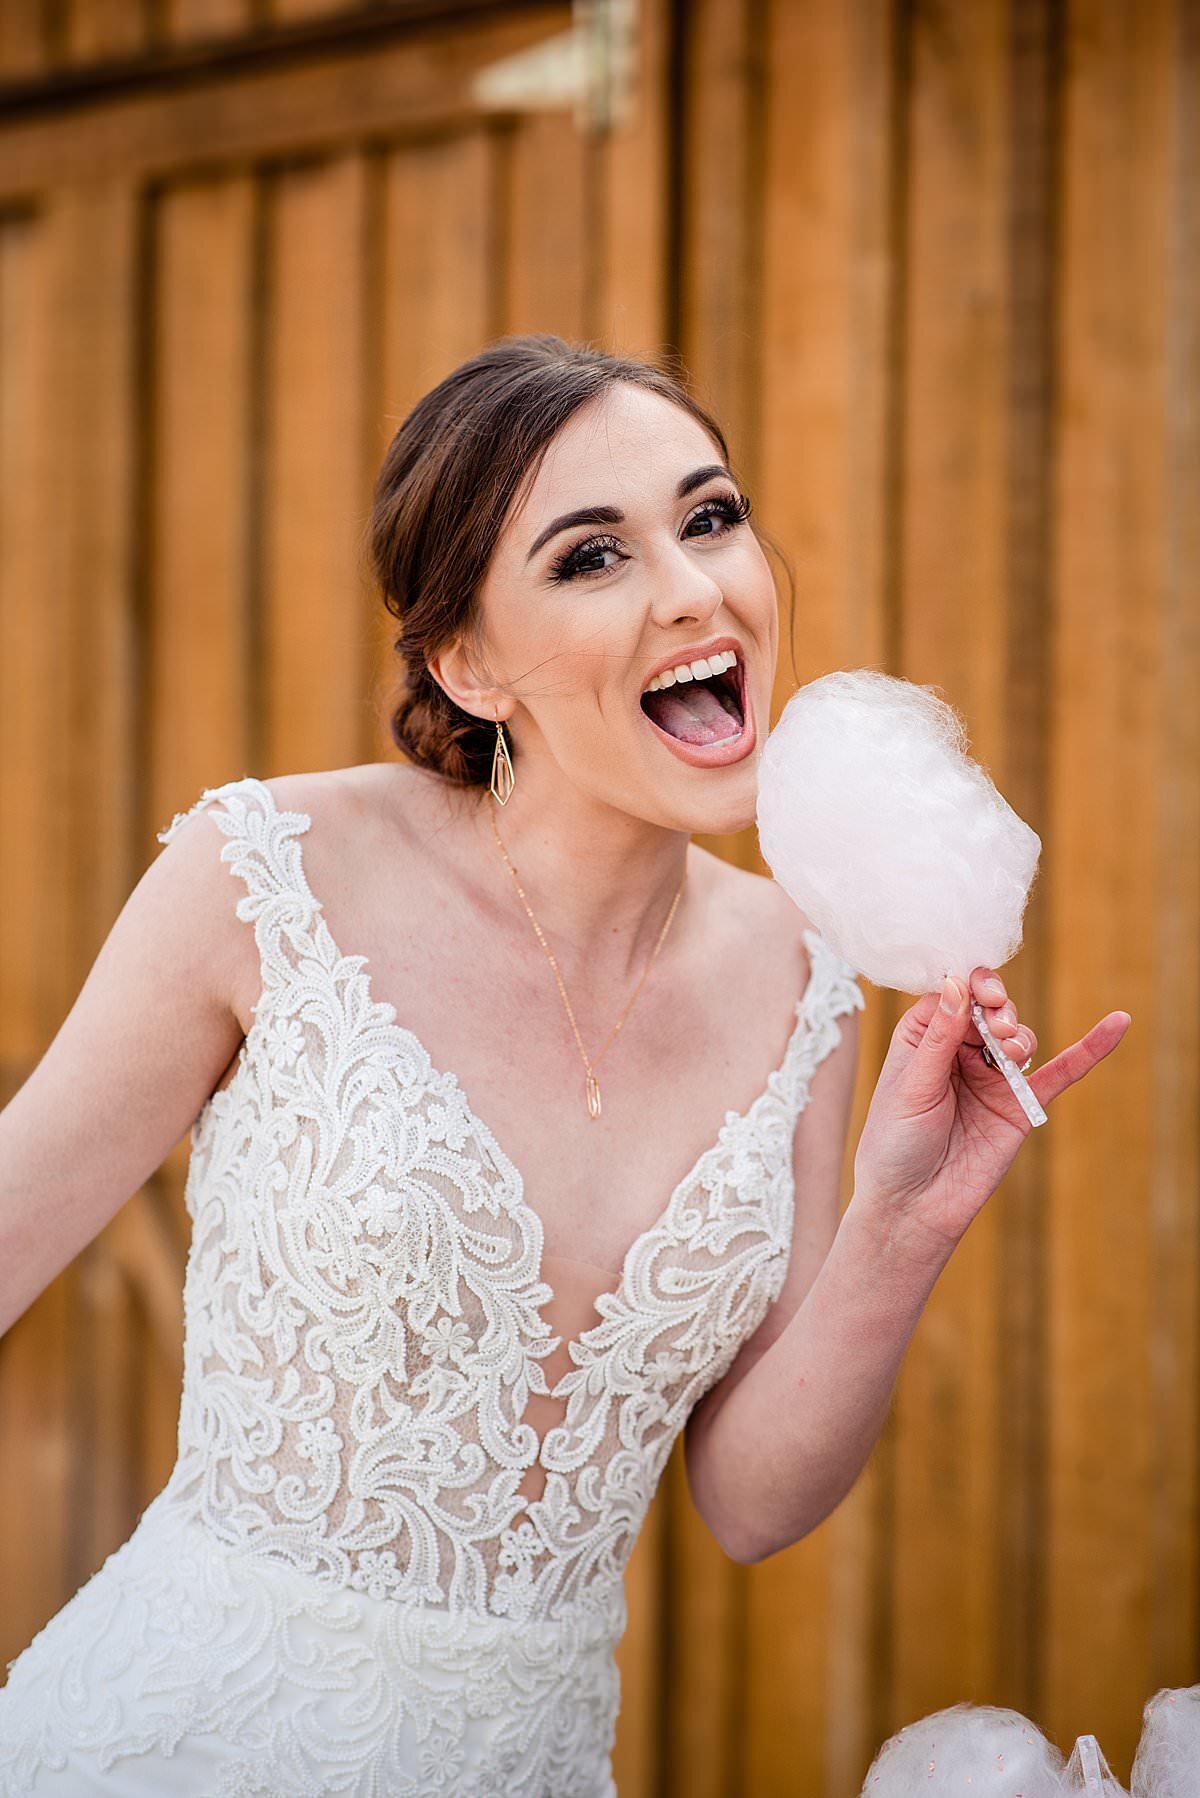 Bride wearing a lace dress with plunging neckline holding a petite  cotton candy